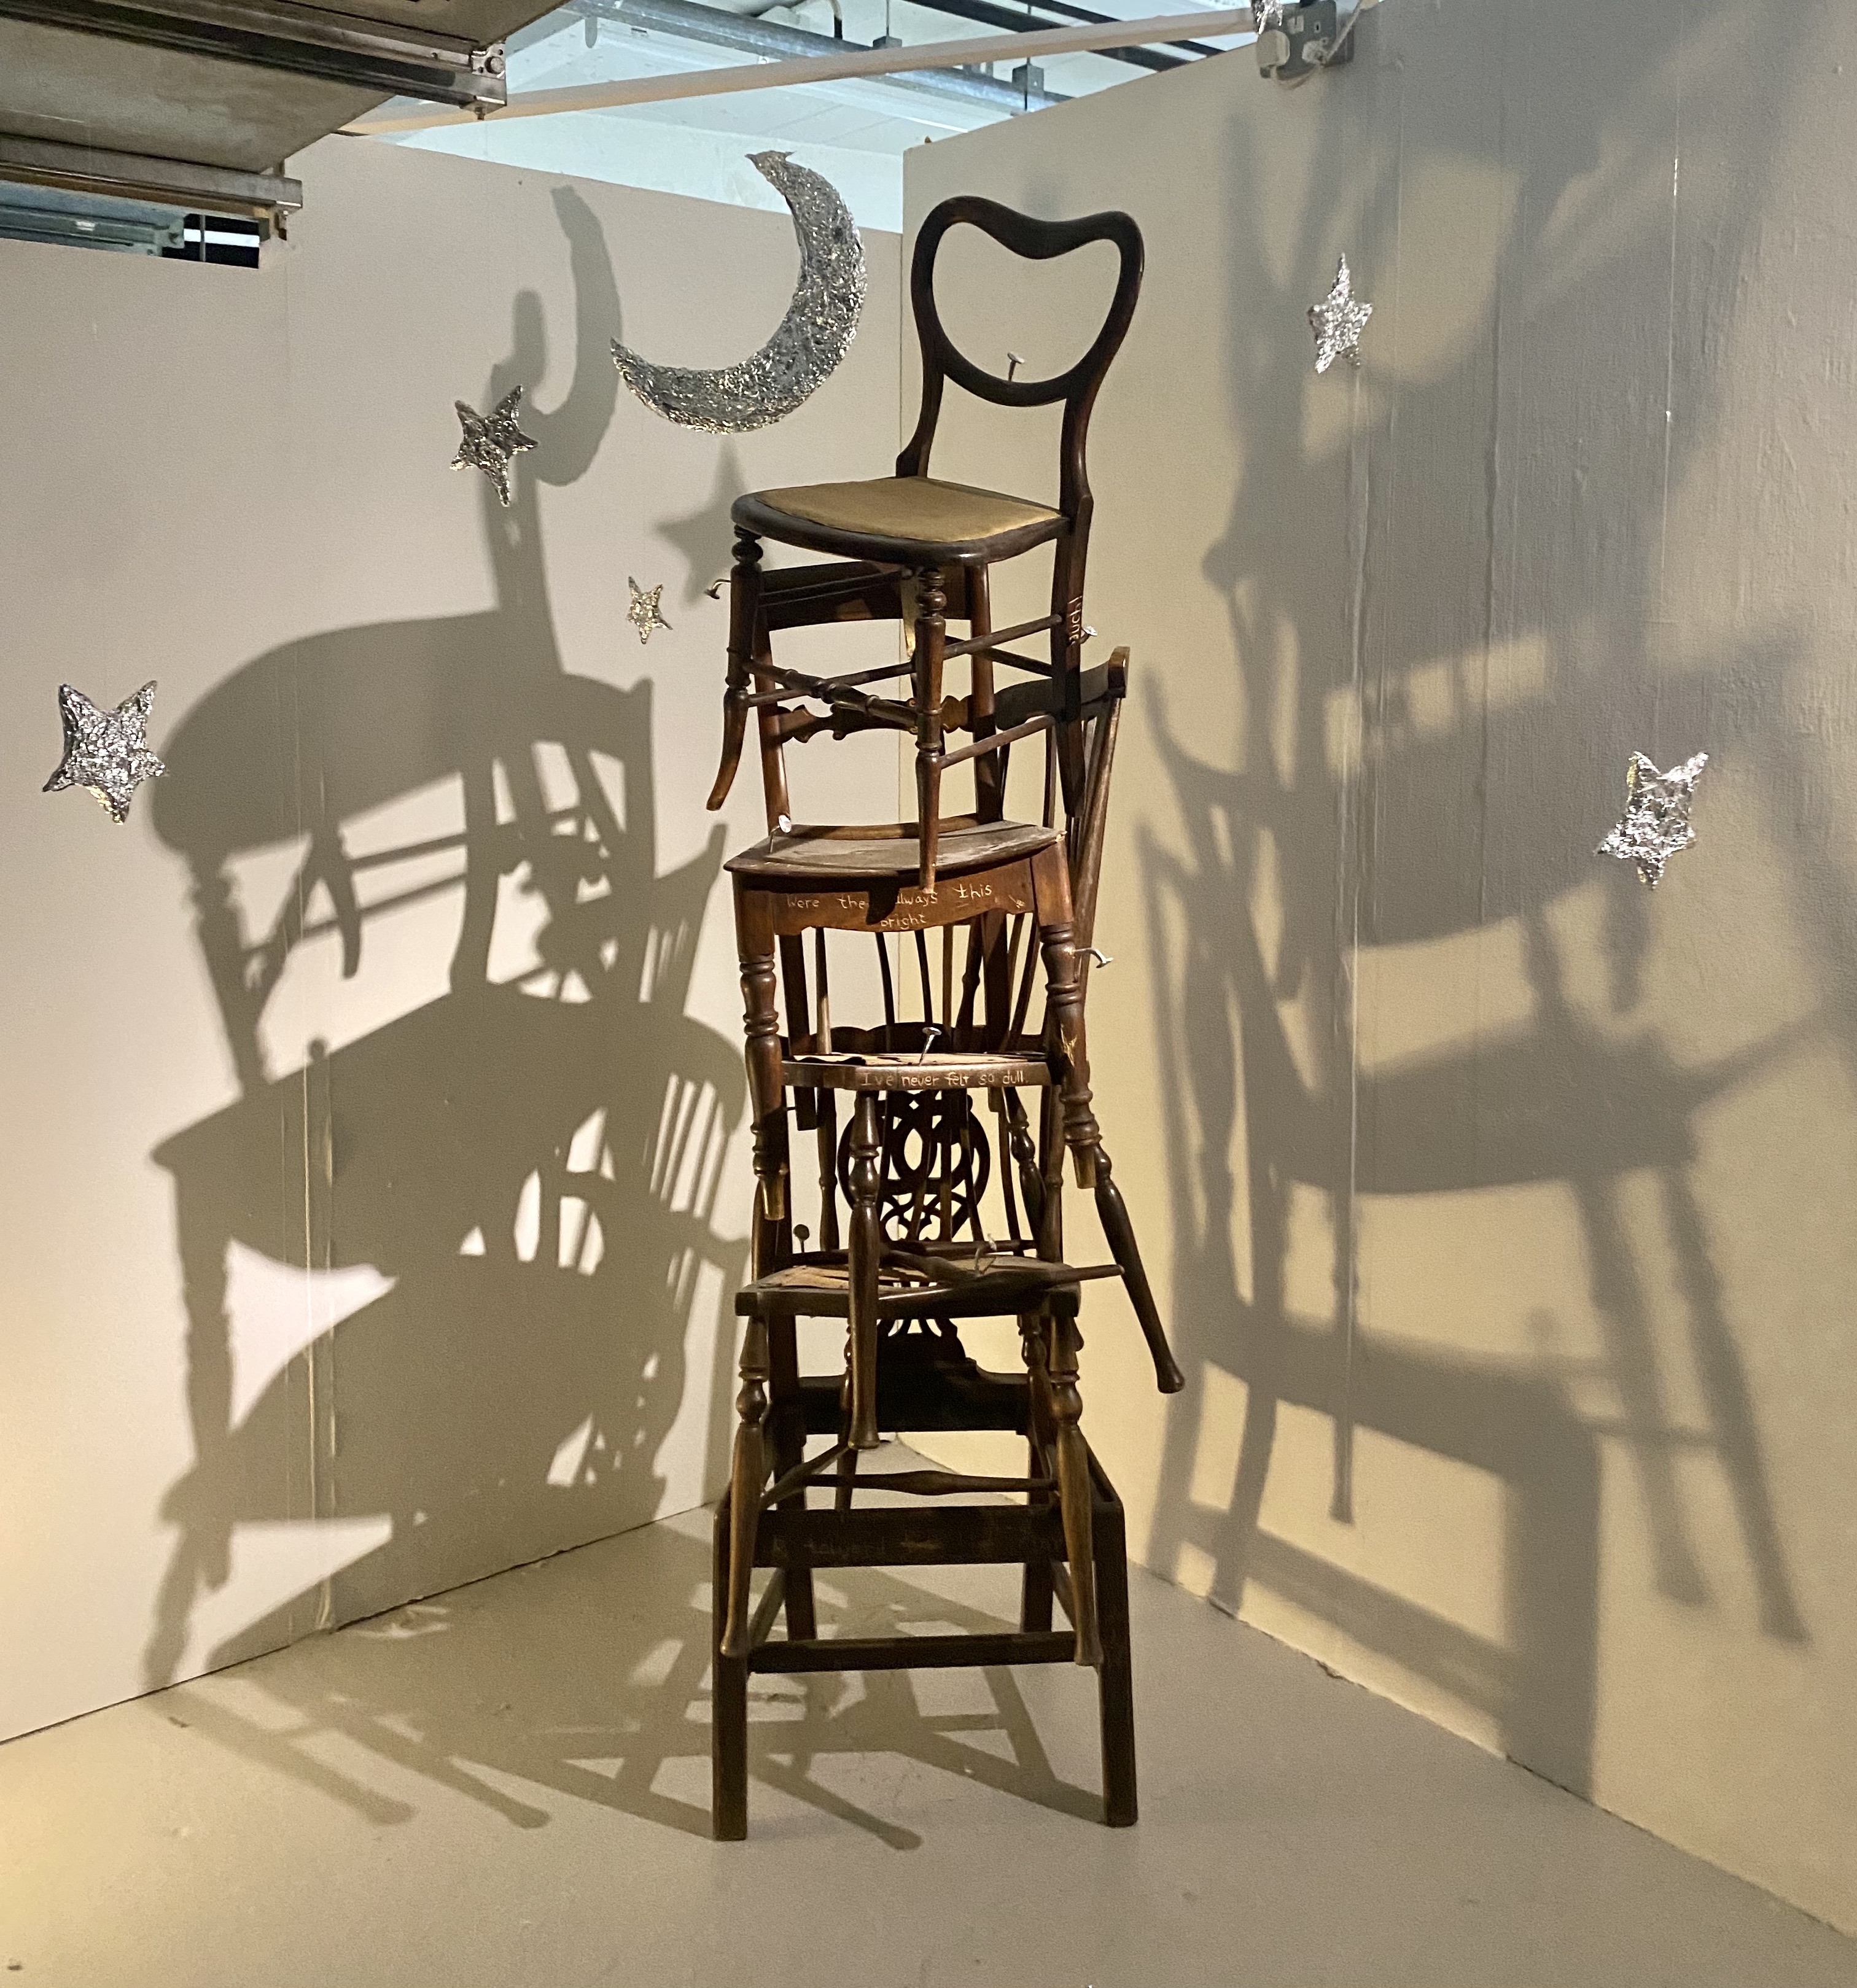 Fine Art work by Liv Nightingale showing a sculptural chair stack